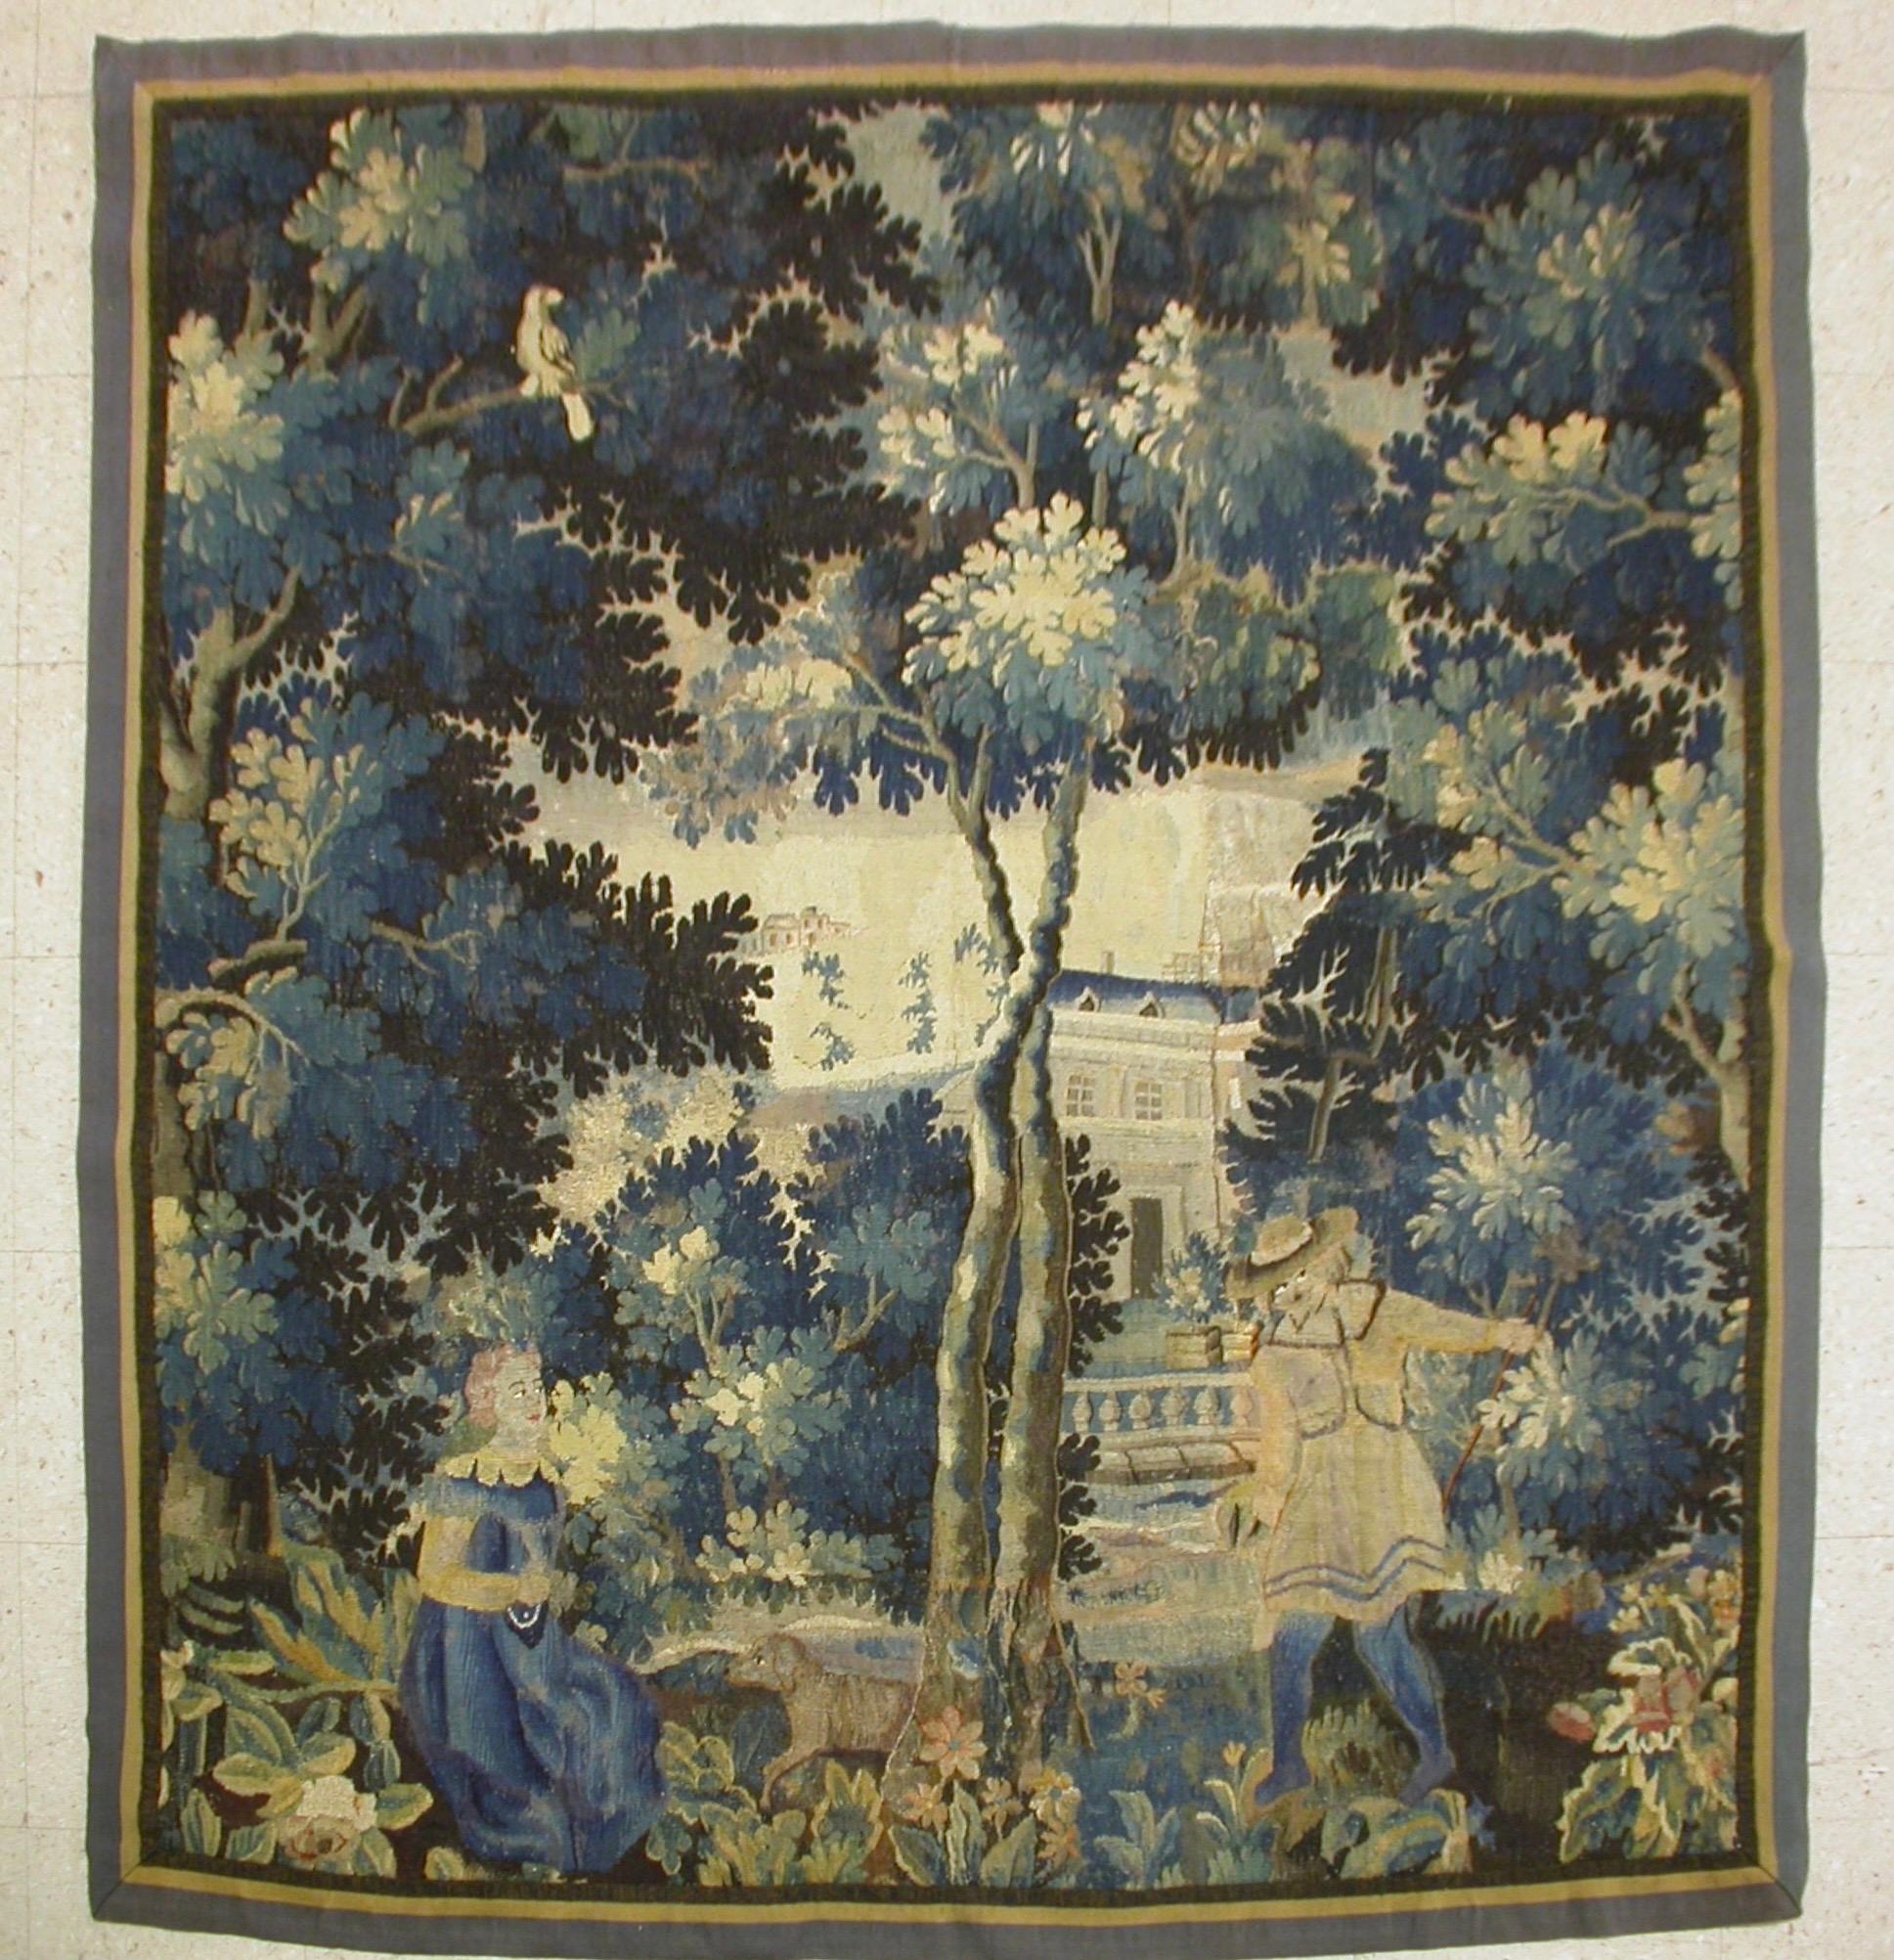 This is a gorgeous antique square 17th Century flemish Verdure landscape tapestry with two slight figures in a beautiful and rich summer scene of a countryside with lush trees and vegetation and homes in the distance. 

The piece measures 6.3 x 6.9